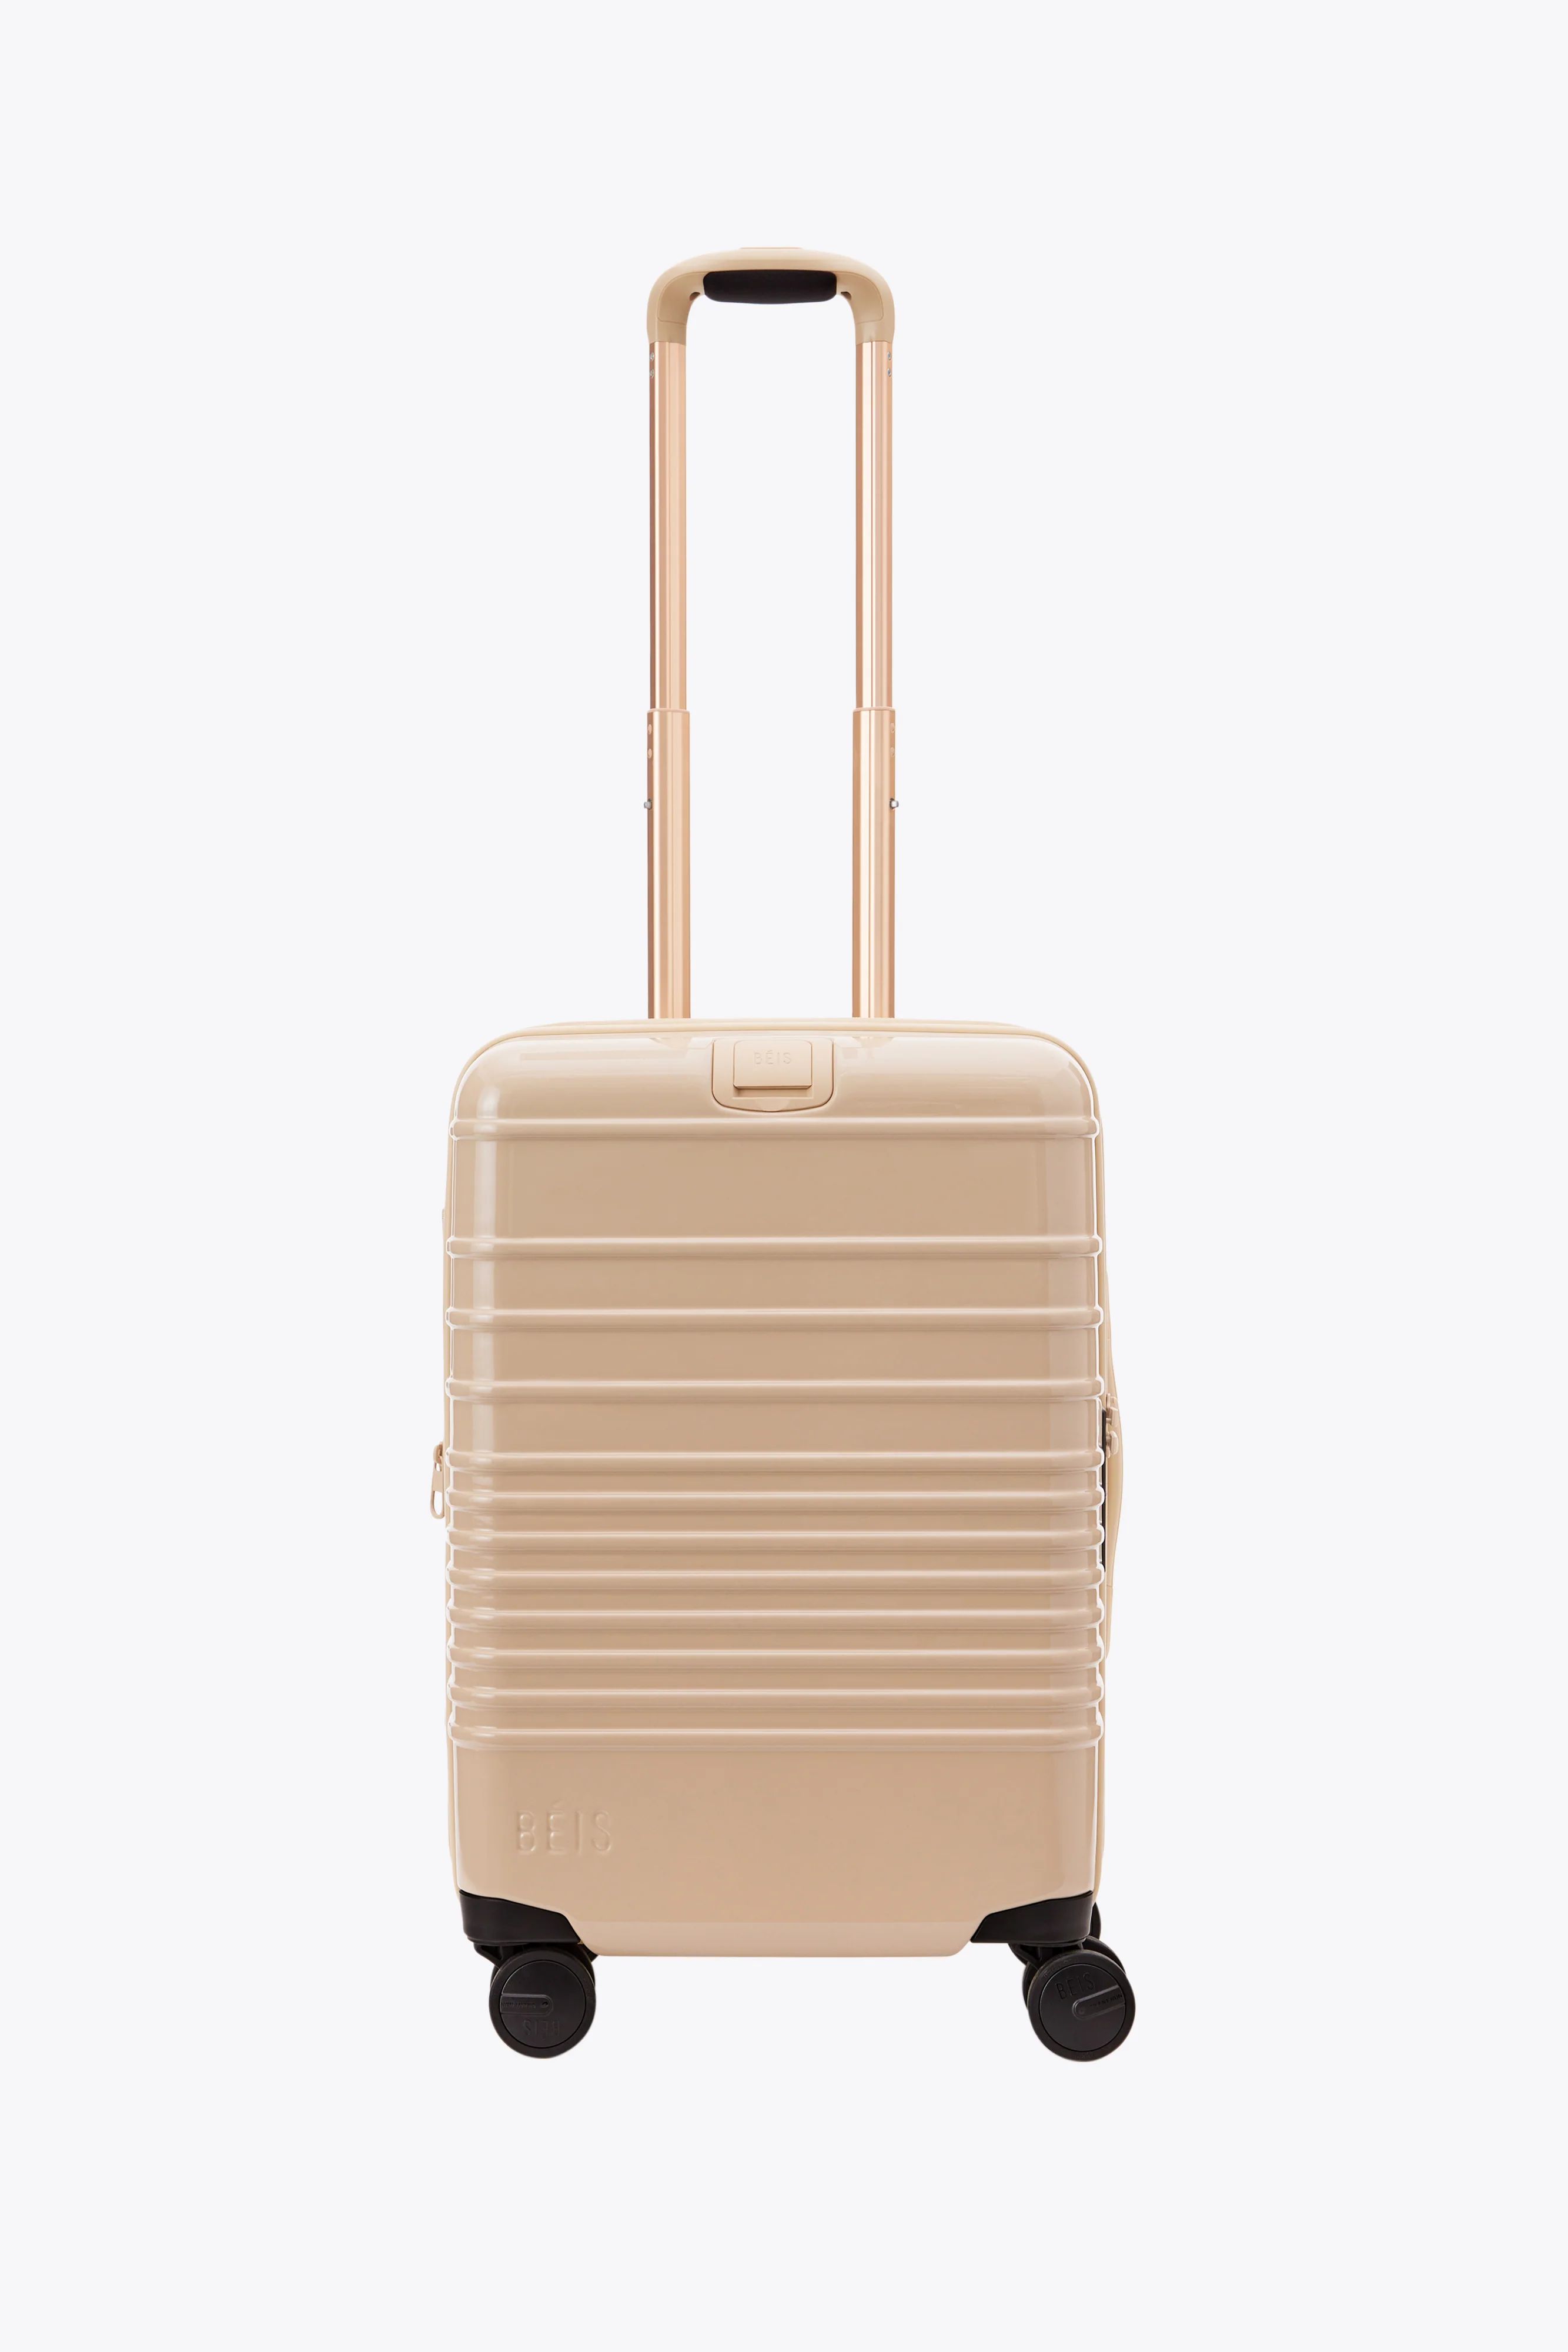 THE CARRY-ON ROLLER IN GLOSSY BEIGE | BÉIS Travel